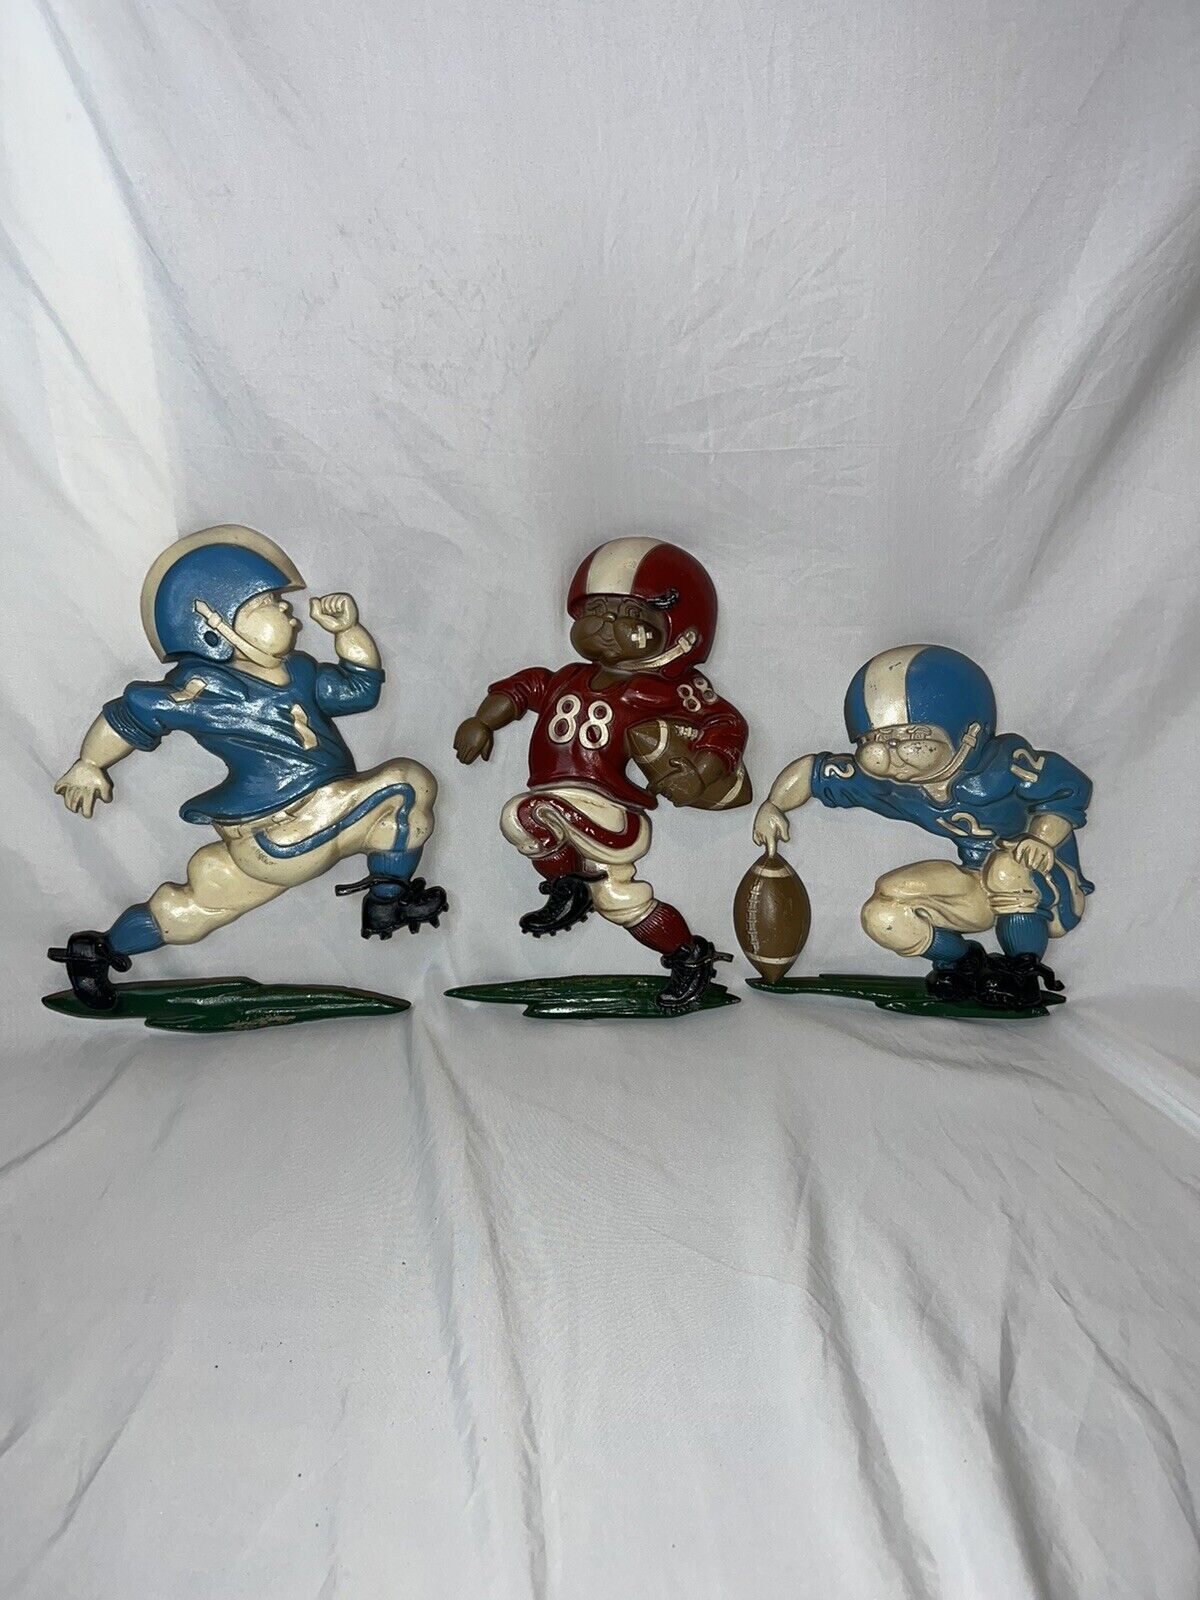 3 pc Vintage 1976 Homco Cast Metal Football Player Wall Hanging Plaque set